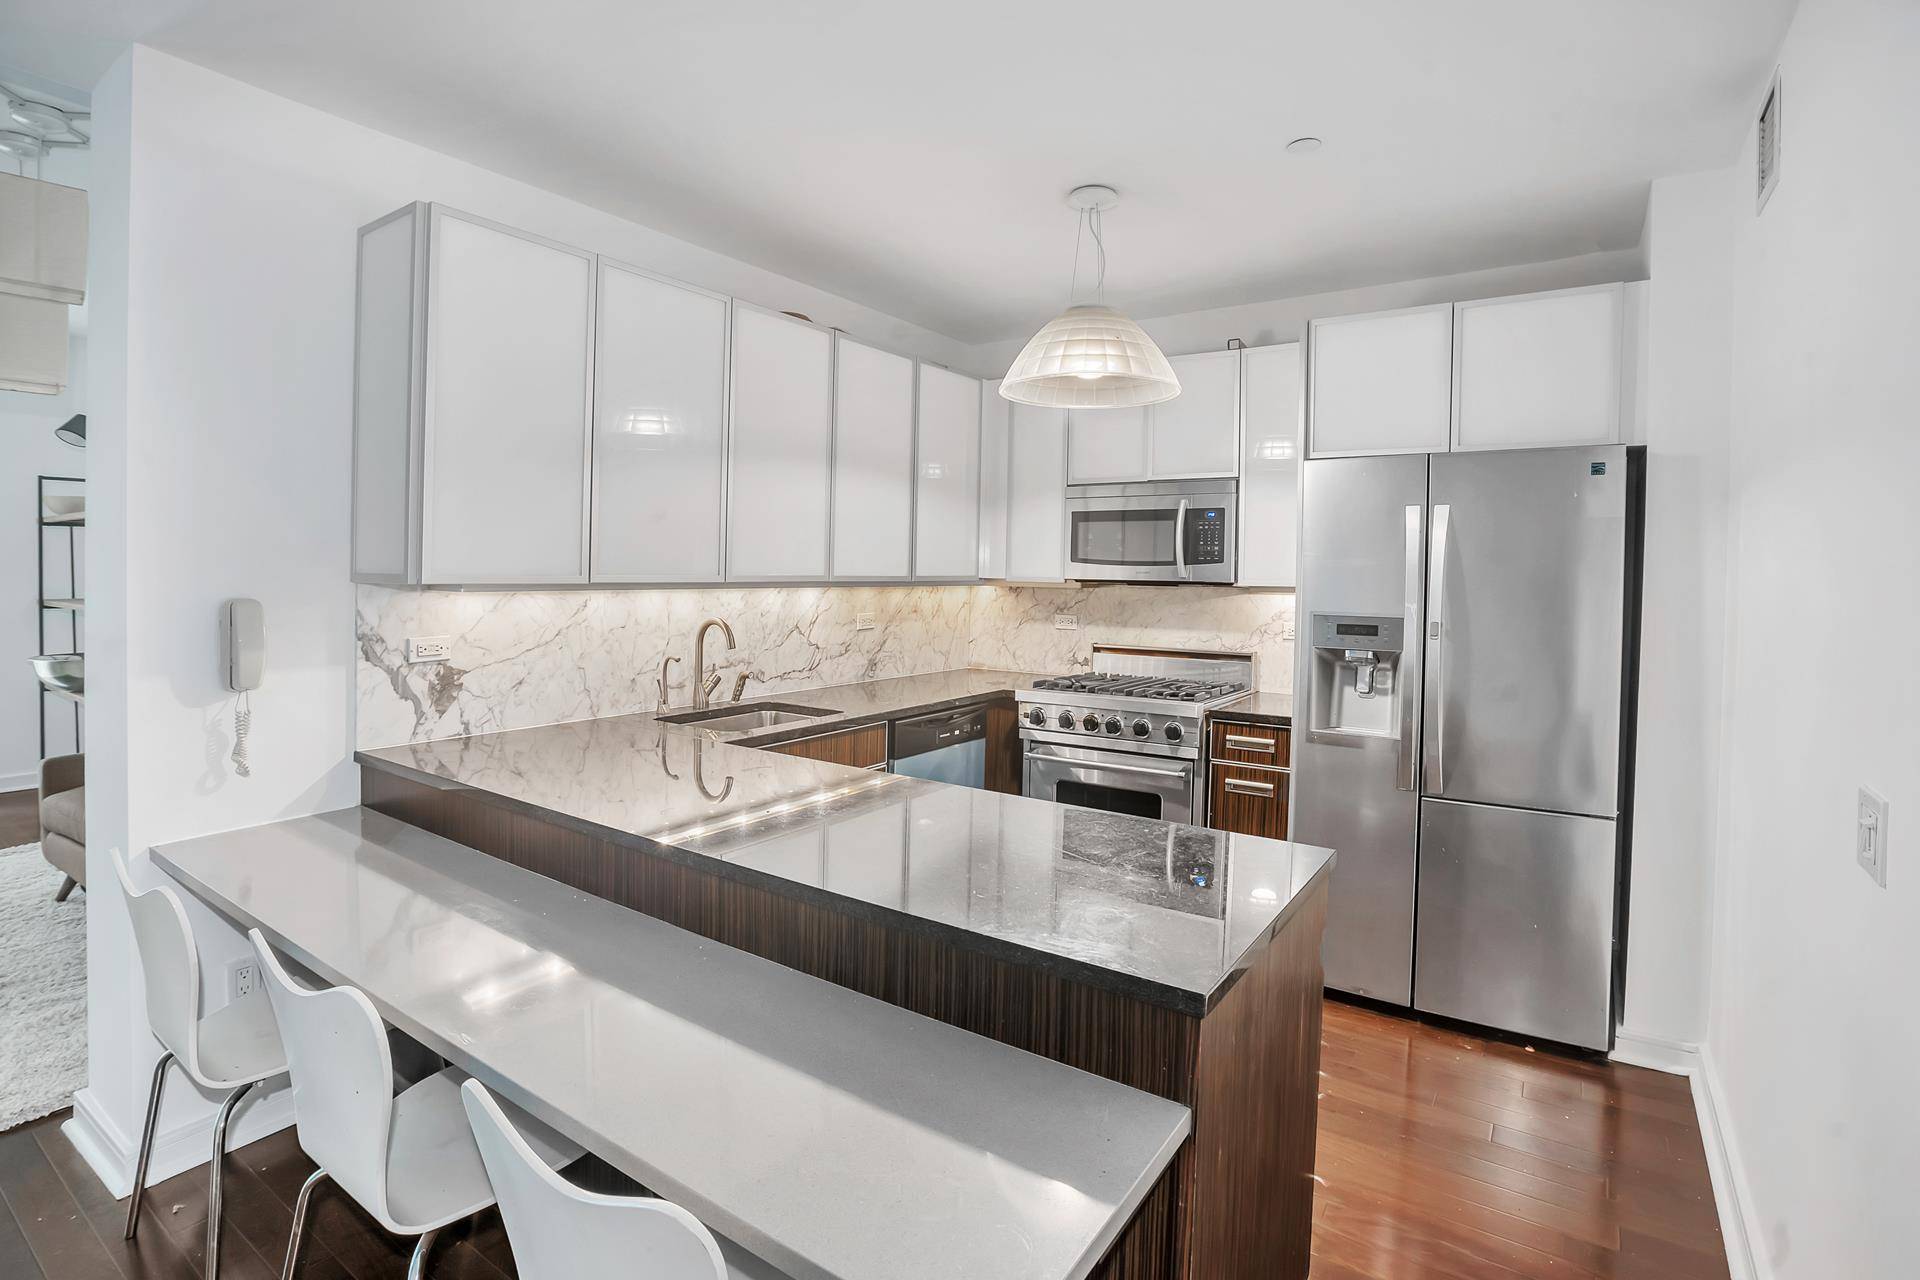 Presently utilized as a Two Bedroom 2BR Two Bathroom 2BA, with additional space for a Home Office, Apartment 4F at The Chelsea House, 130 West 19th Street, feels even larger ...